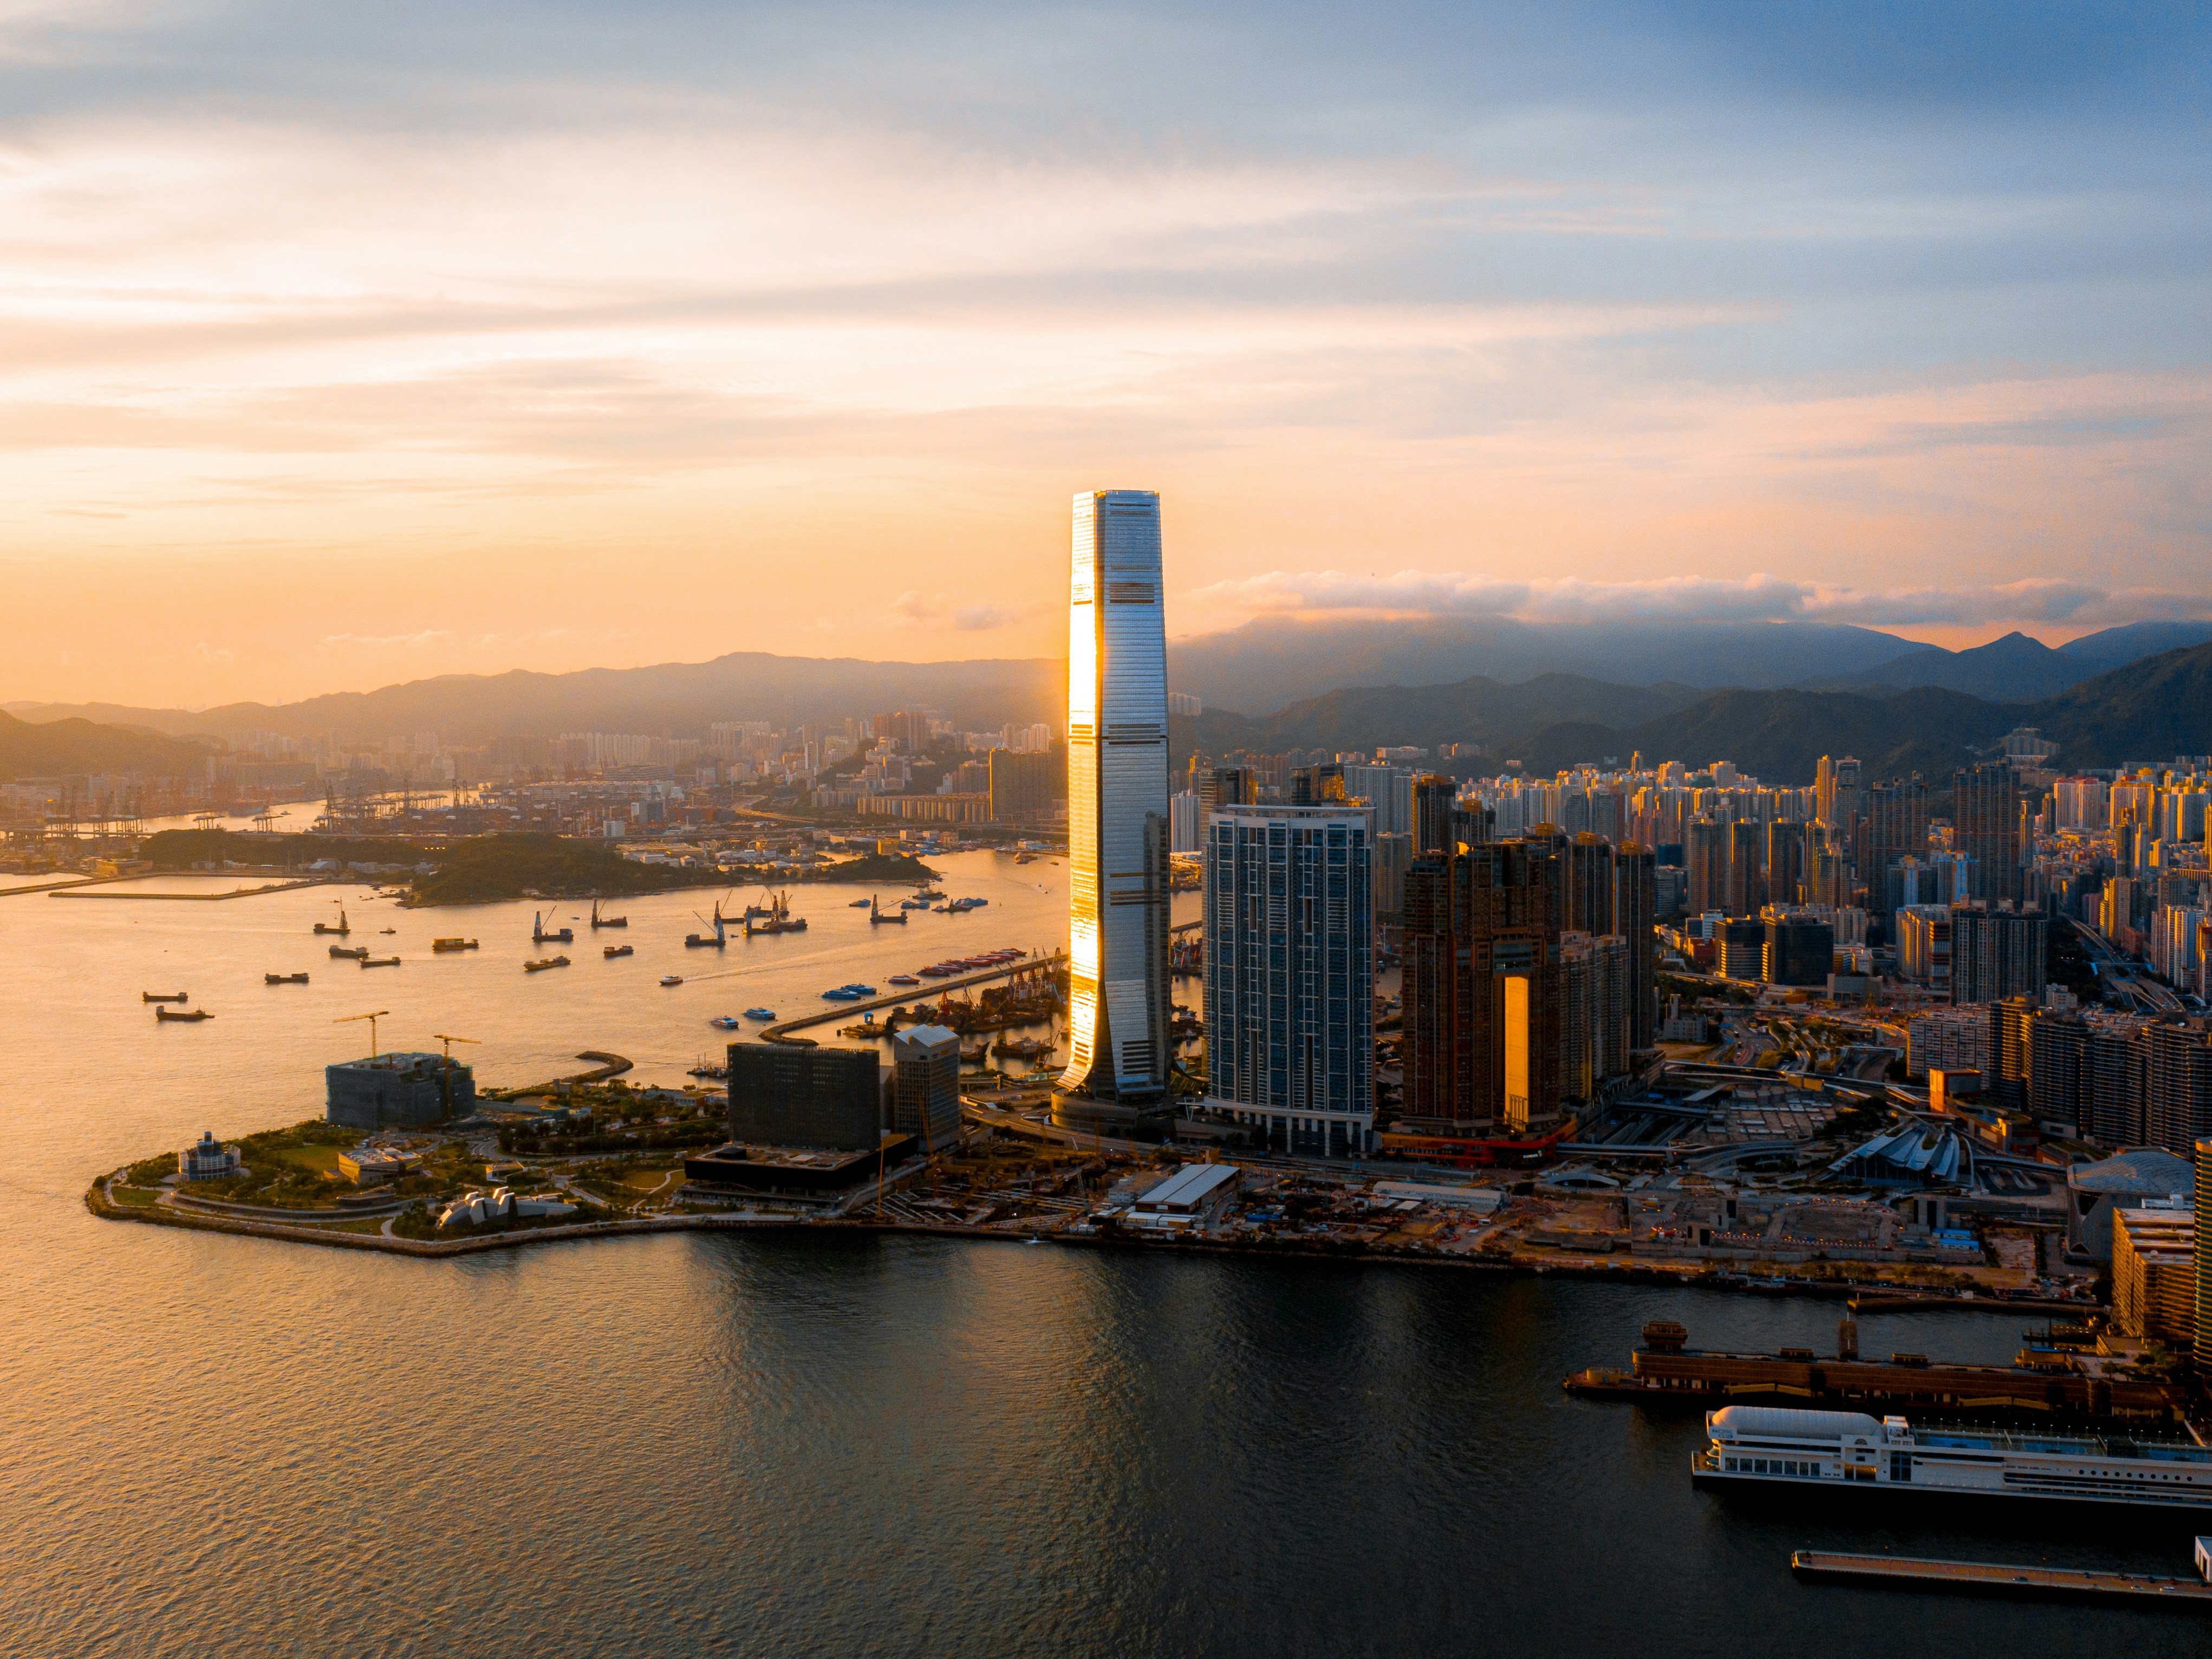 Cityscape of the harbour region of Hong Kong Island during sunset